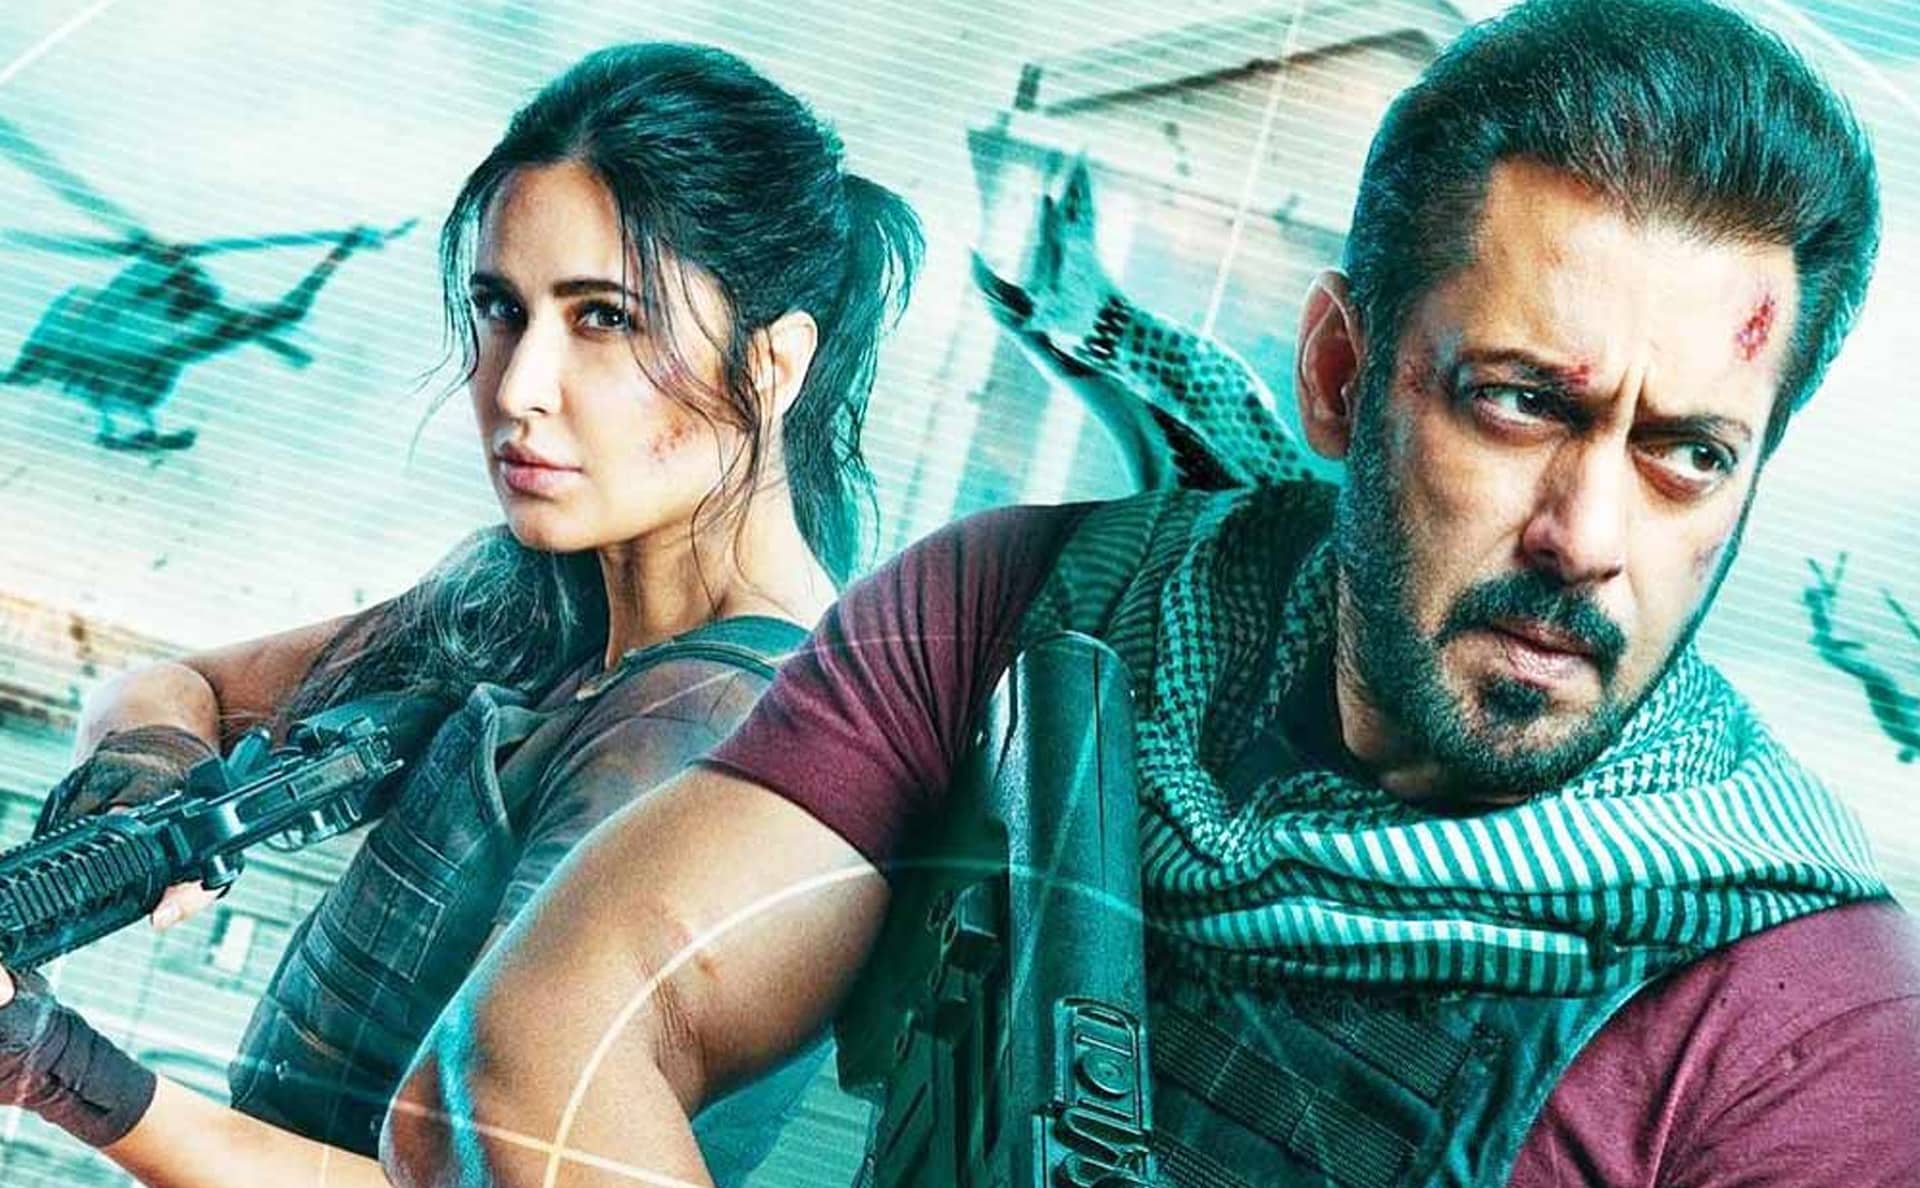 Salman Khan's 'Tiger 3' Banned From Release in Kuwait and Qatar Due to Negative Portrayal of Muslim Characters in the Film